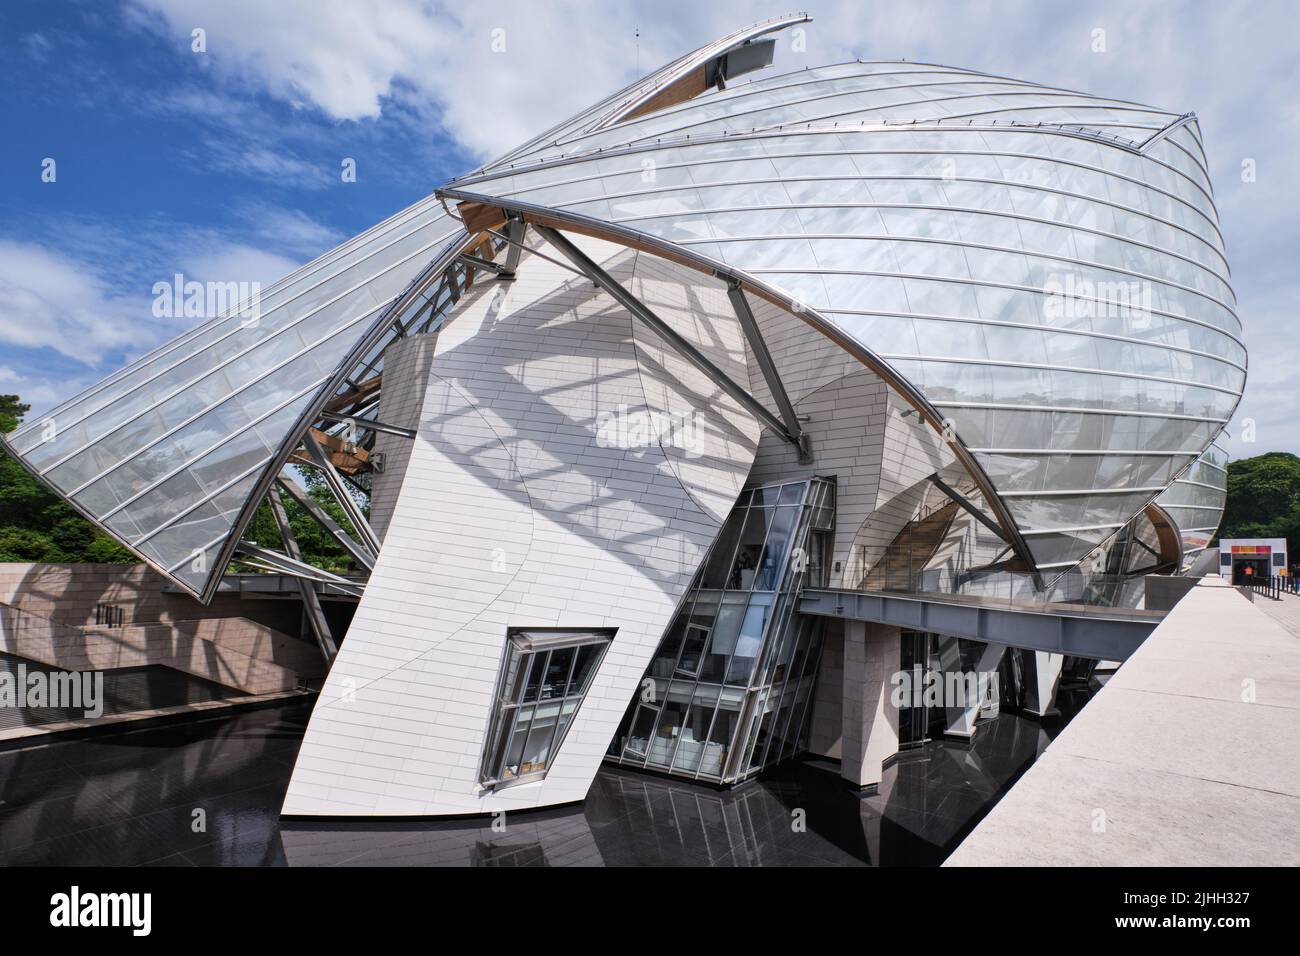 Louis Vuitton Foundation Designed by Frank Gehry Editorial Stock